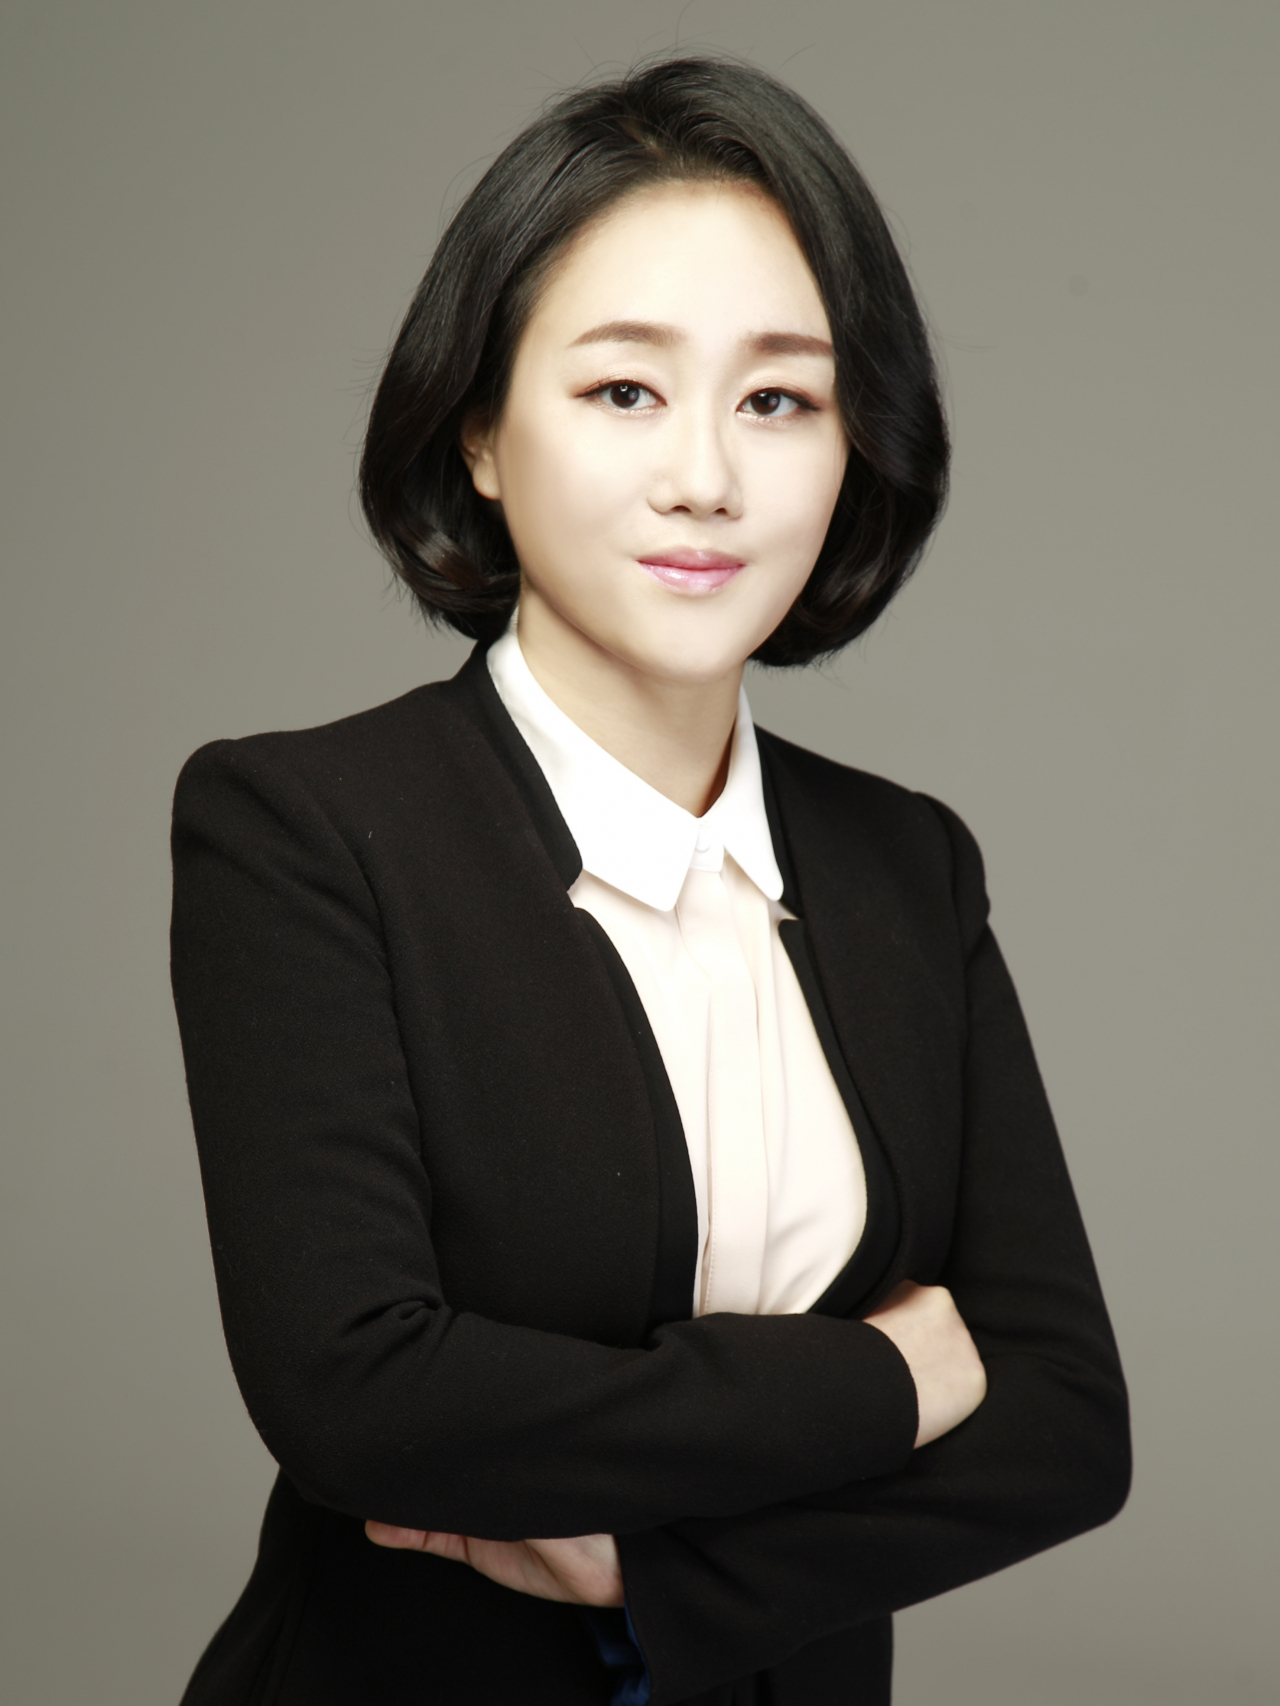 Kim Yae-jin, an attorney at law firm Woo & Partners (Courtesy of Kim)